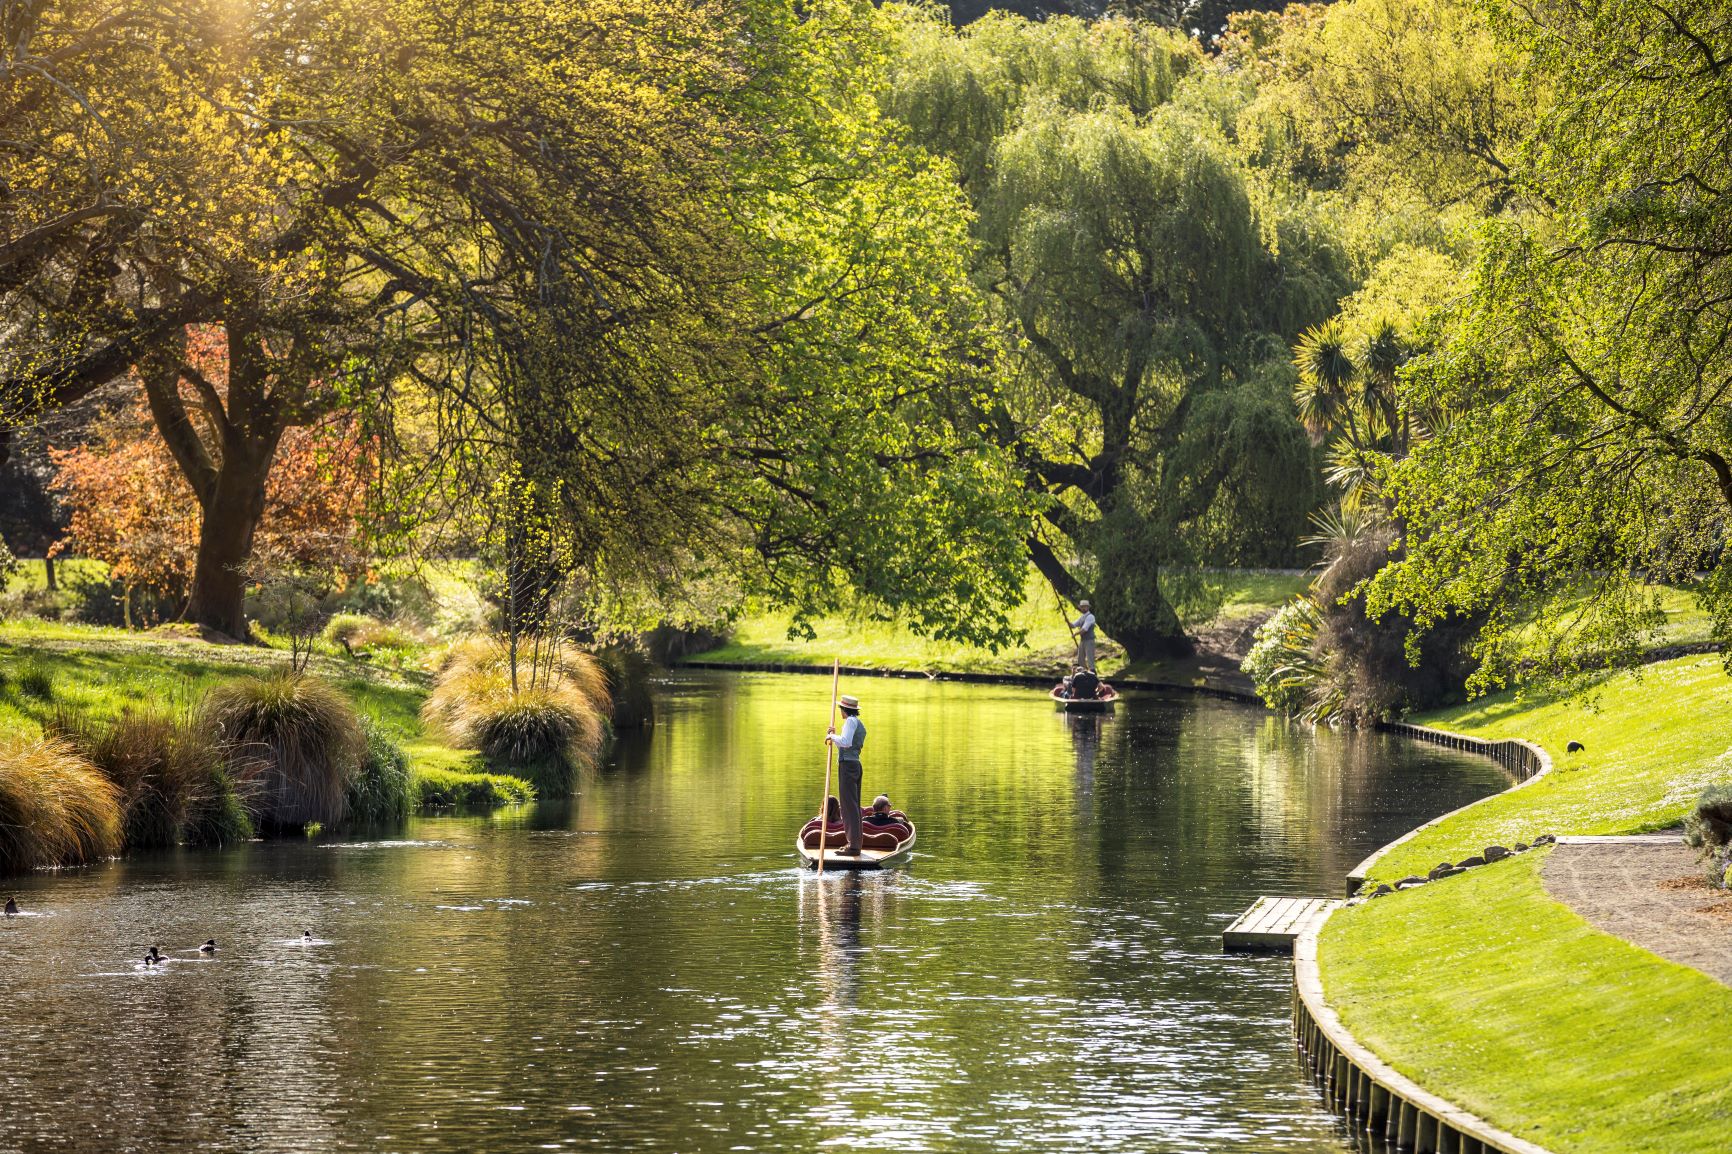 48 hours in Christchurch & surrounds for nature lovers | NeedaBreak